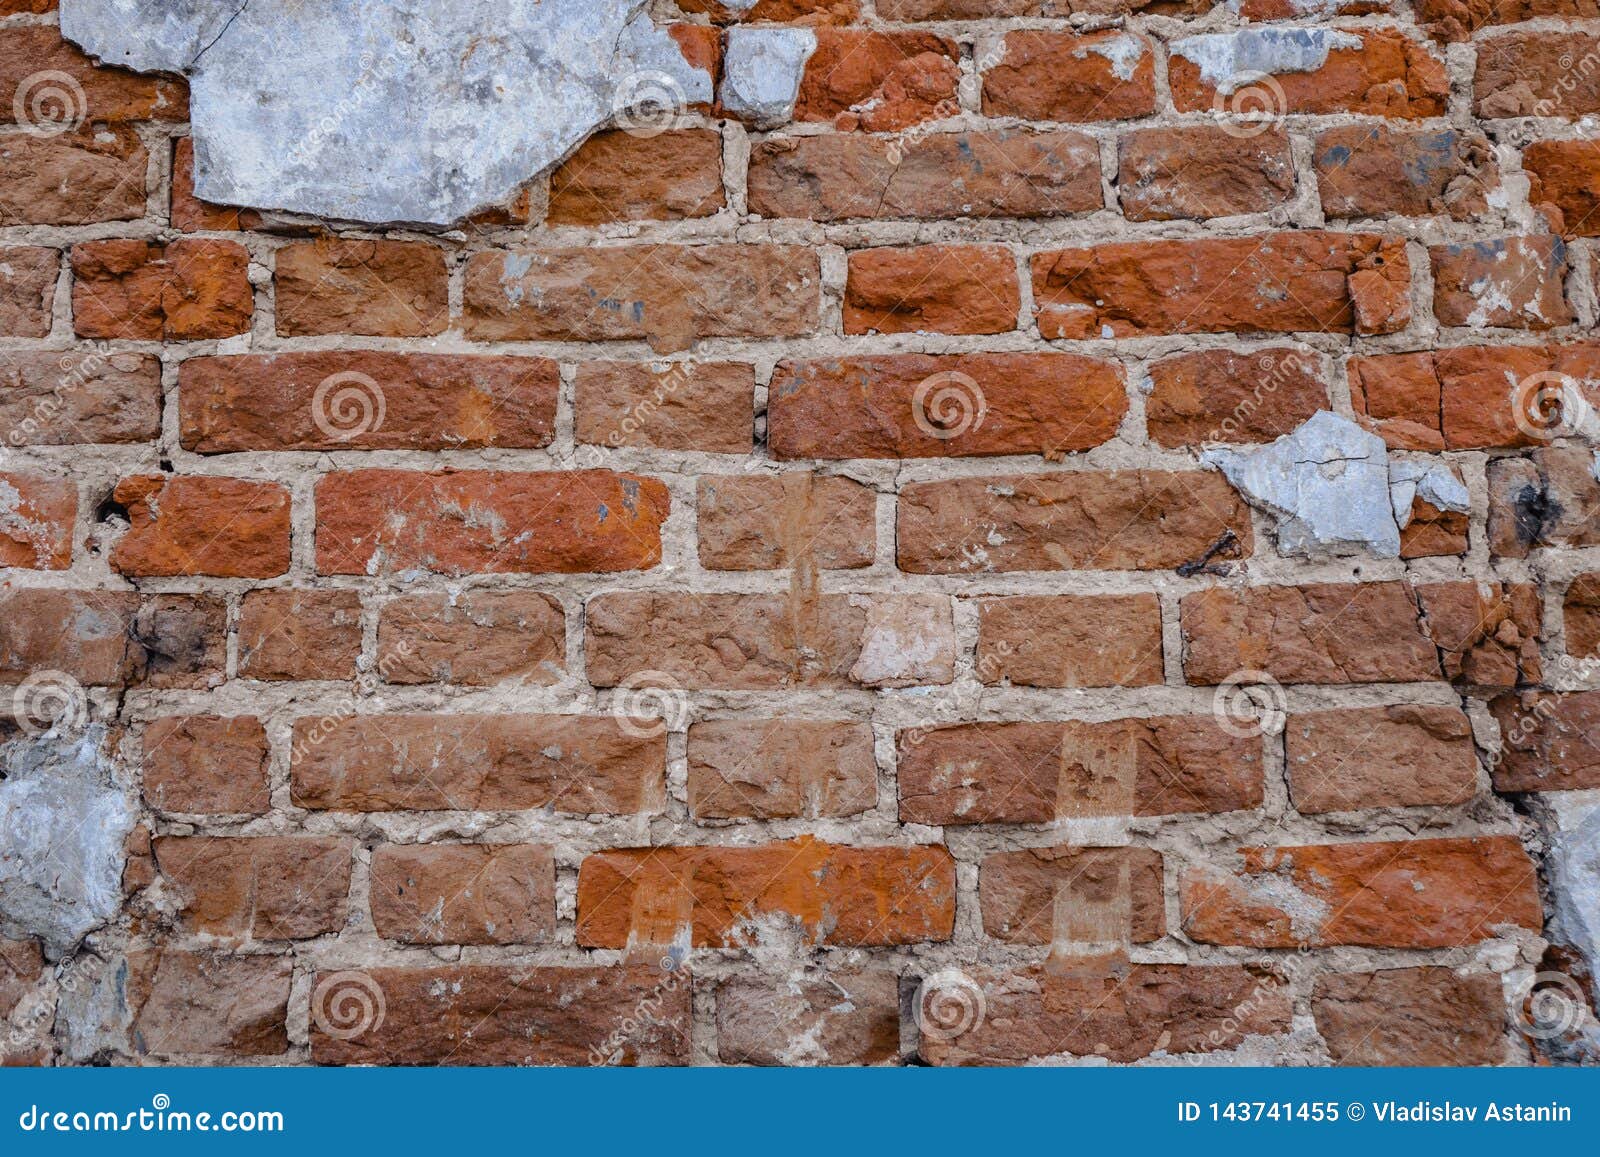 Old Red Brick Wall Texture Background Dark Stock Image ...